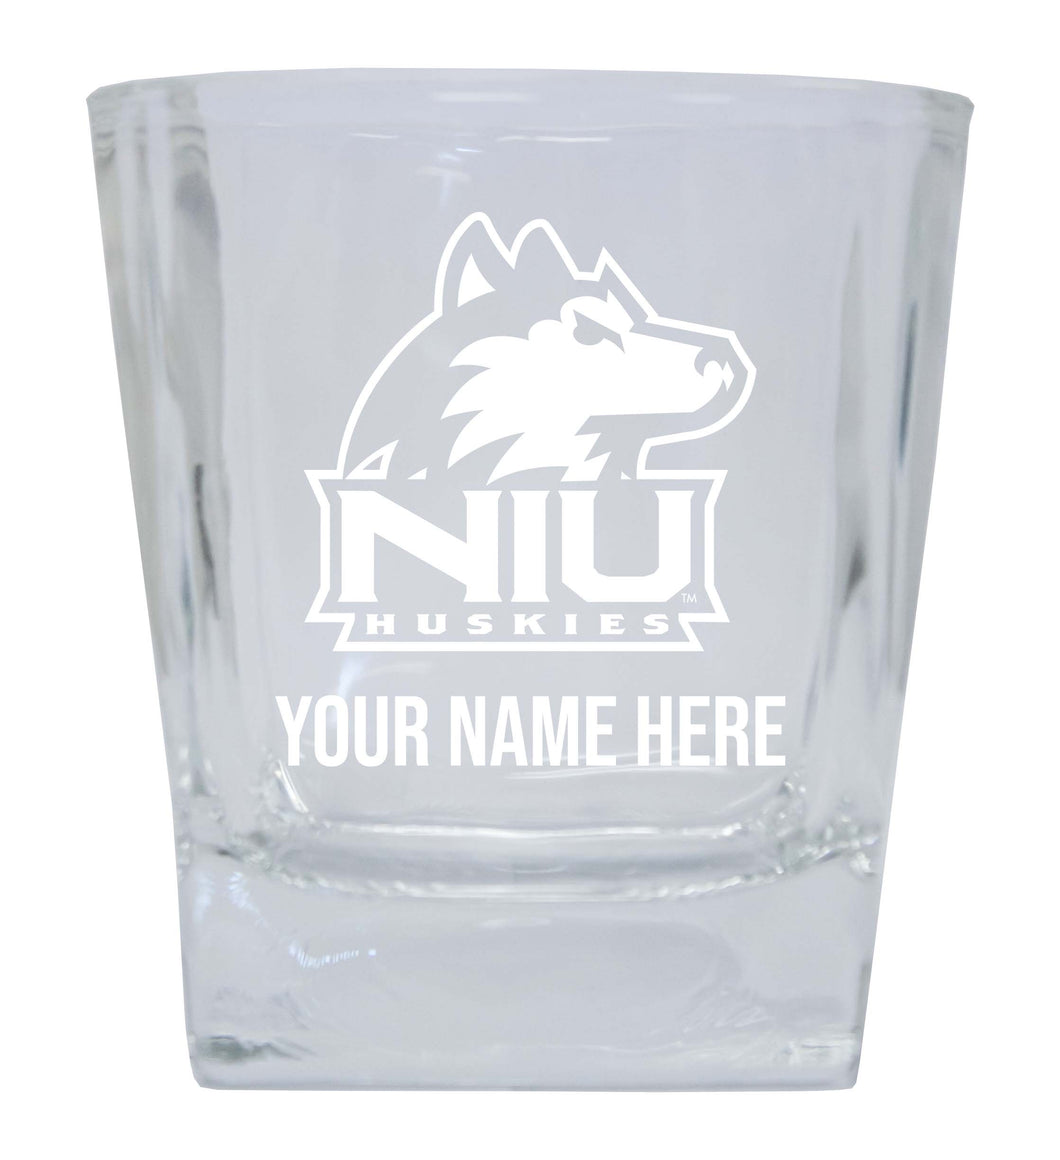 Northern Illinois Huskies 2-Pack Personalized NCAA Spirit Elegance 10oz Etched Glass Tumbler